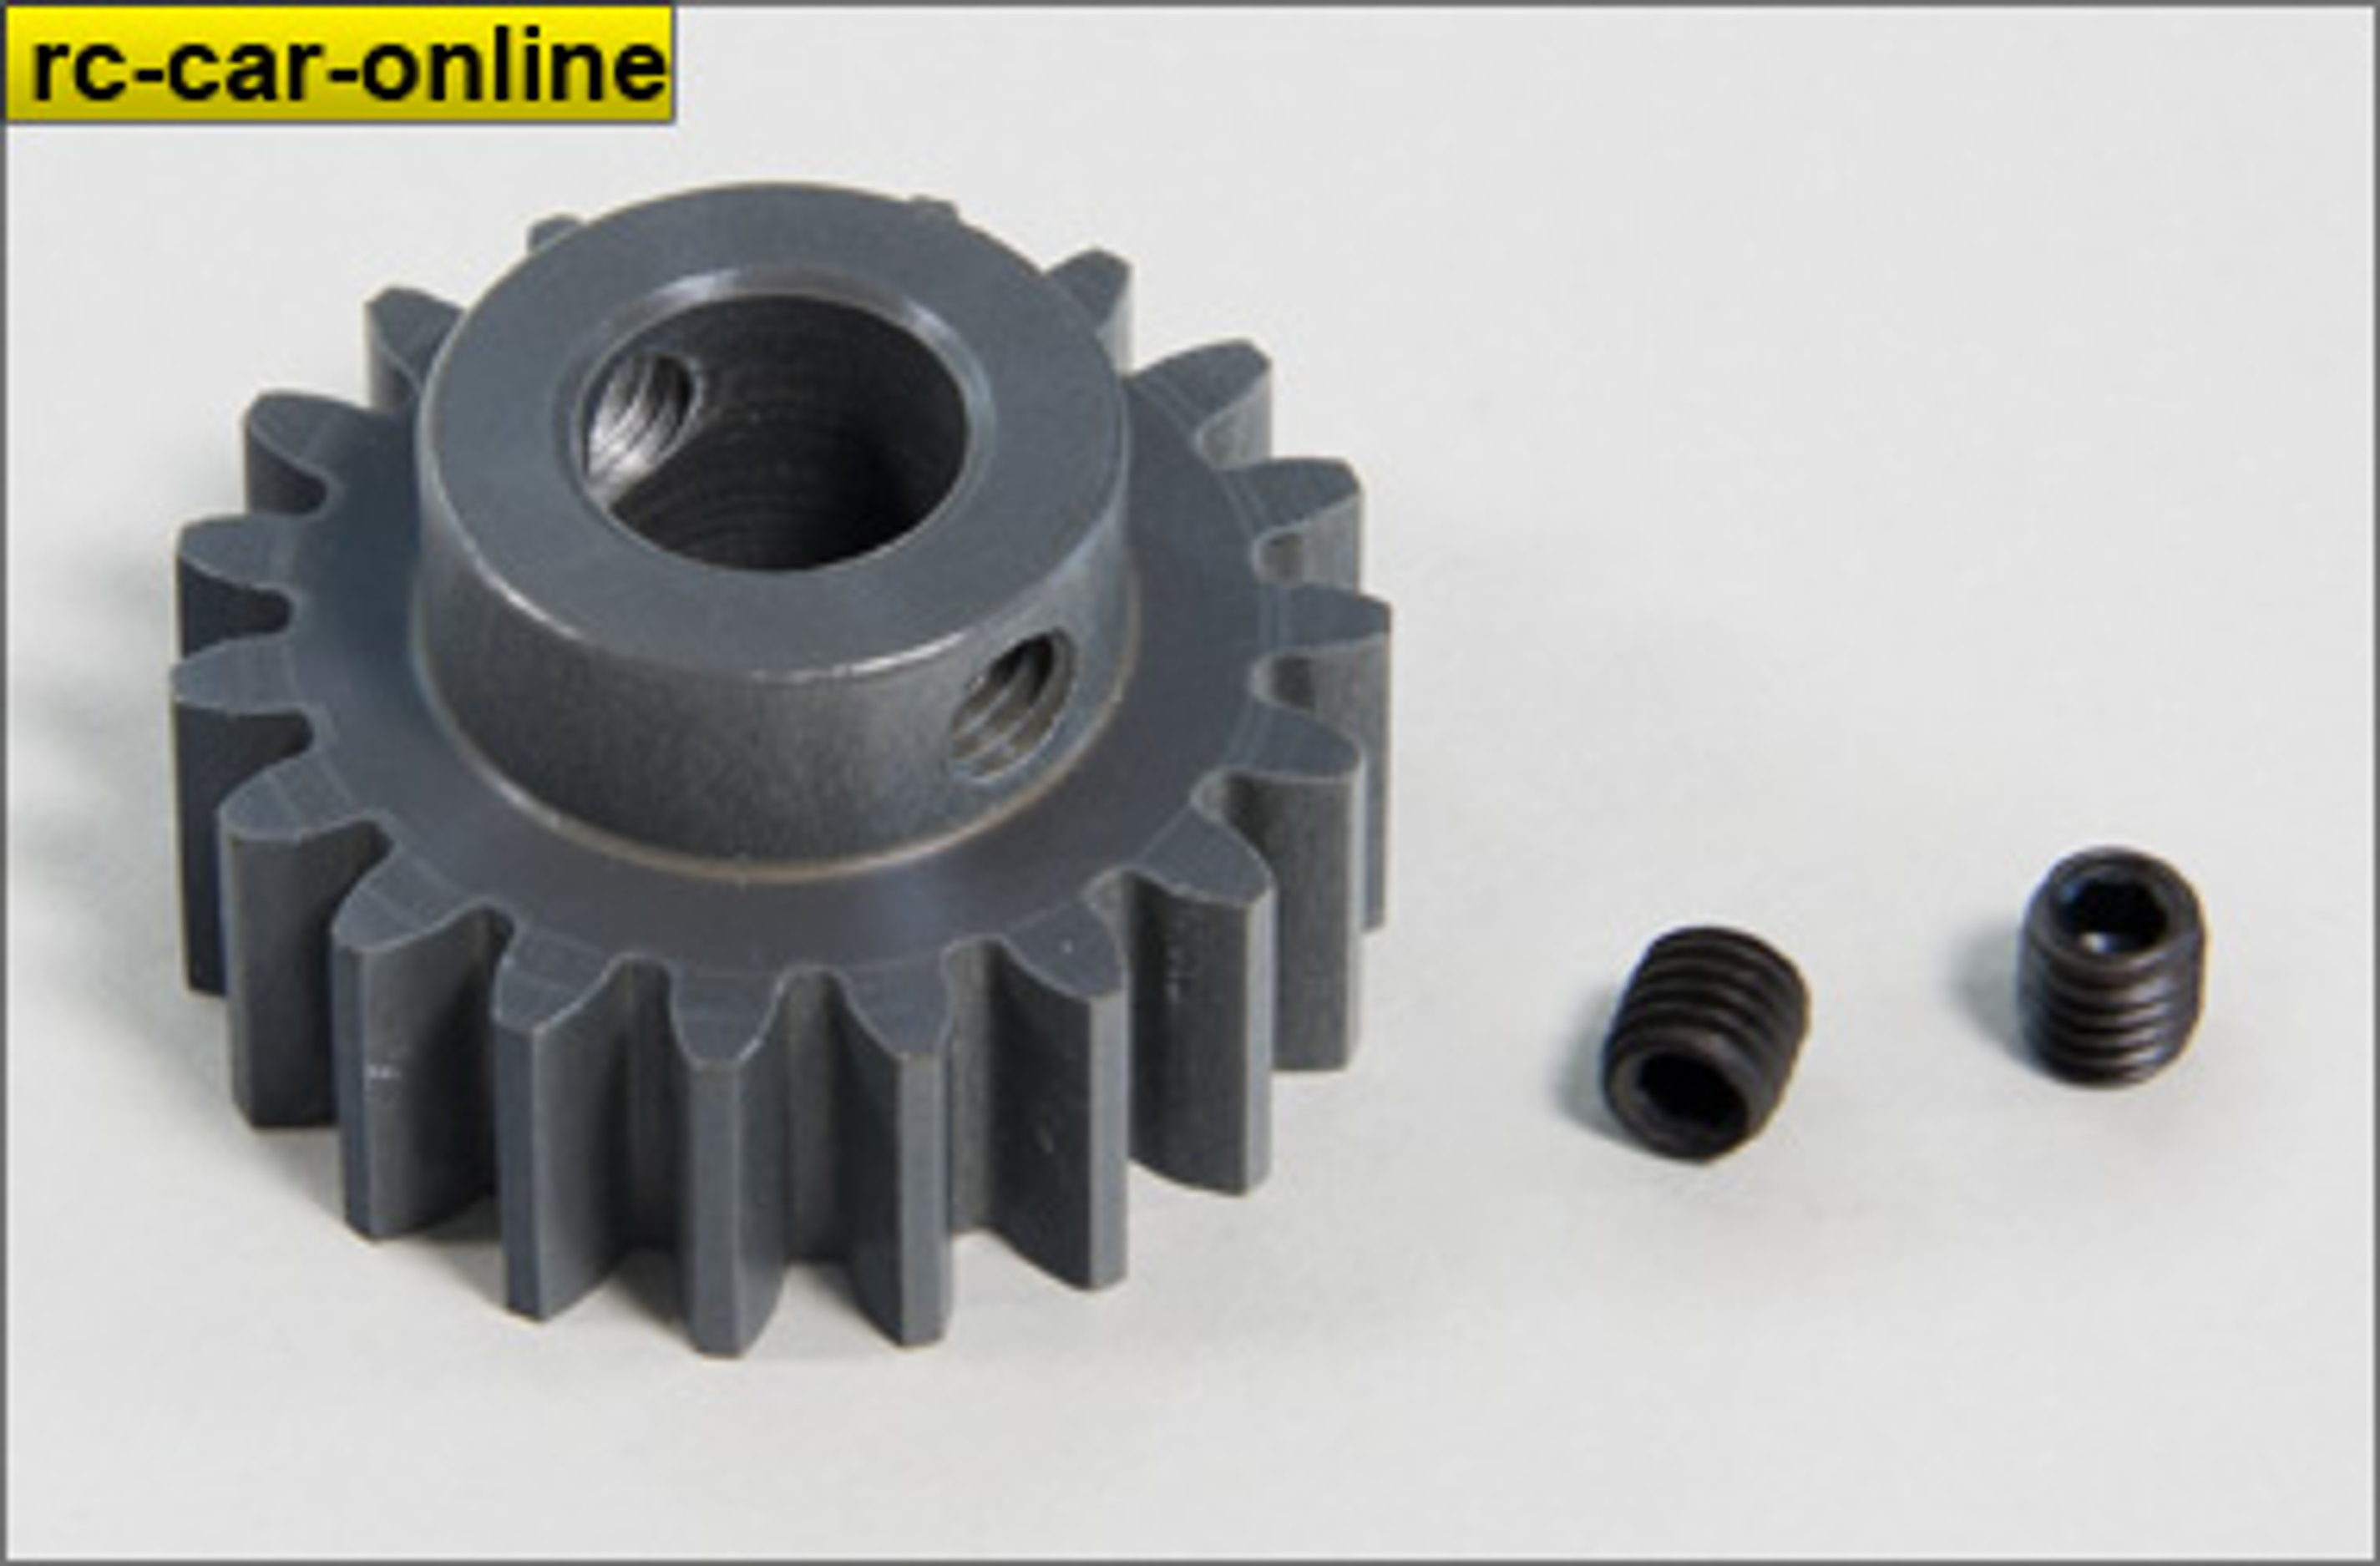 y0714 Alloy pinion 19 tooth, hard anodized, for Carson/Smartech 1/6 scale offroad - 1pce.